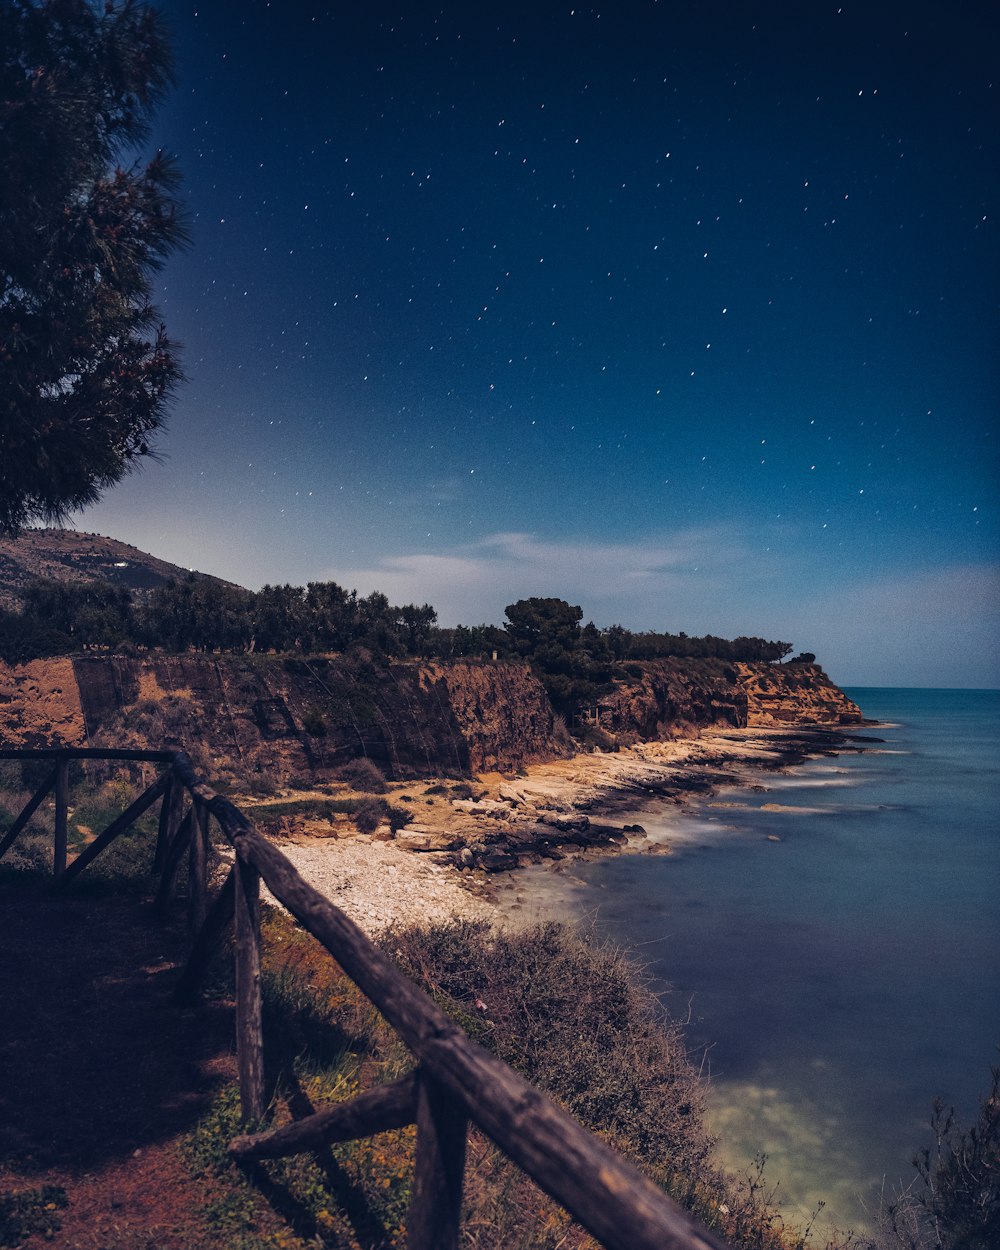 a night time view of a beach with a wooden fence